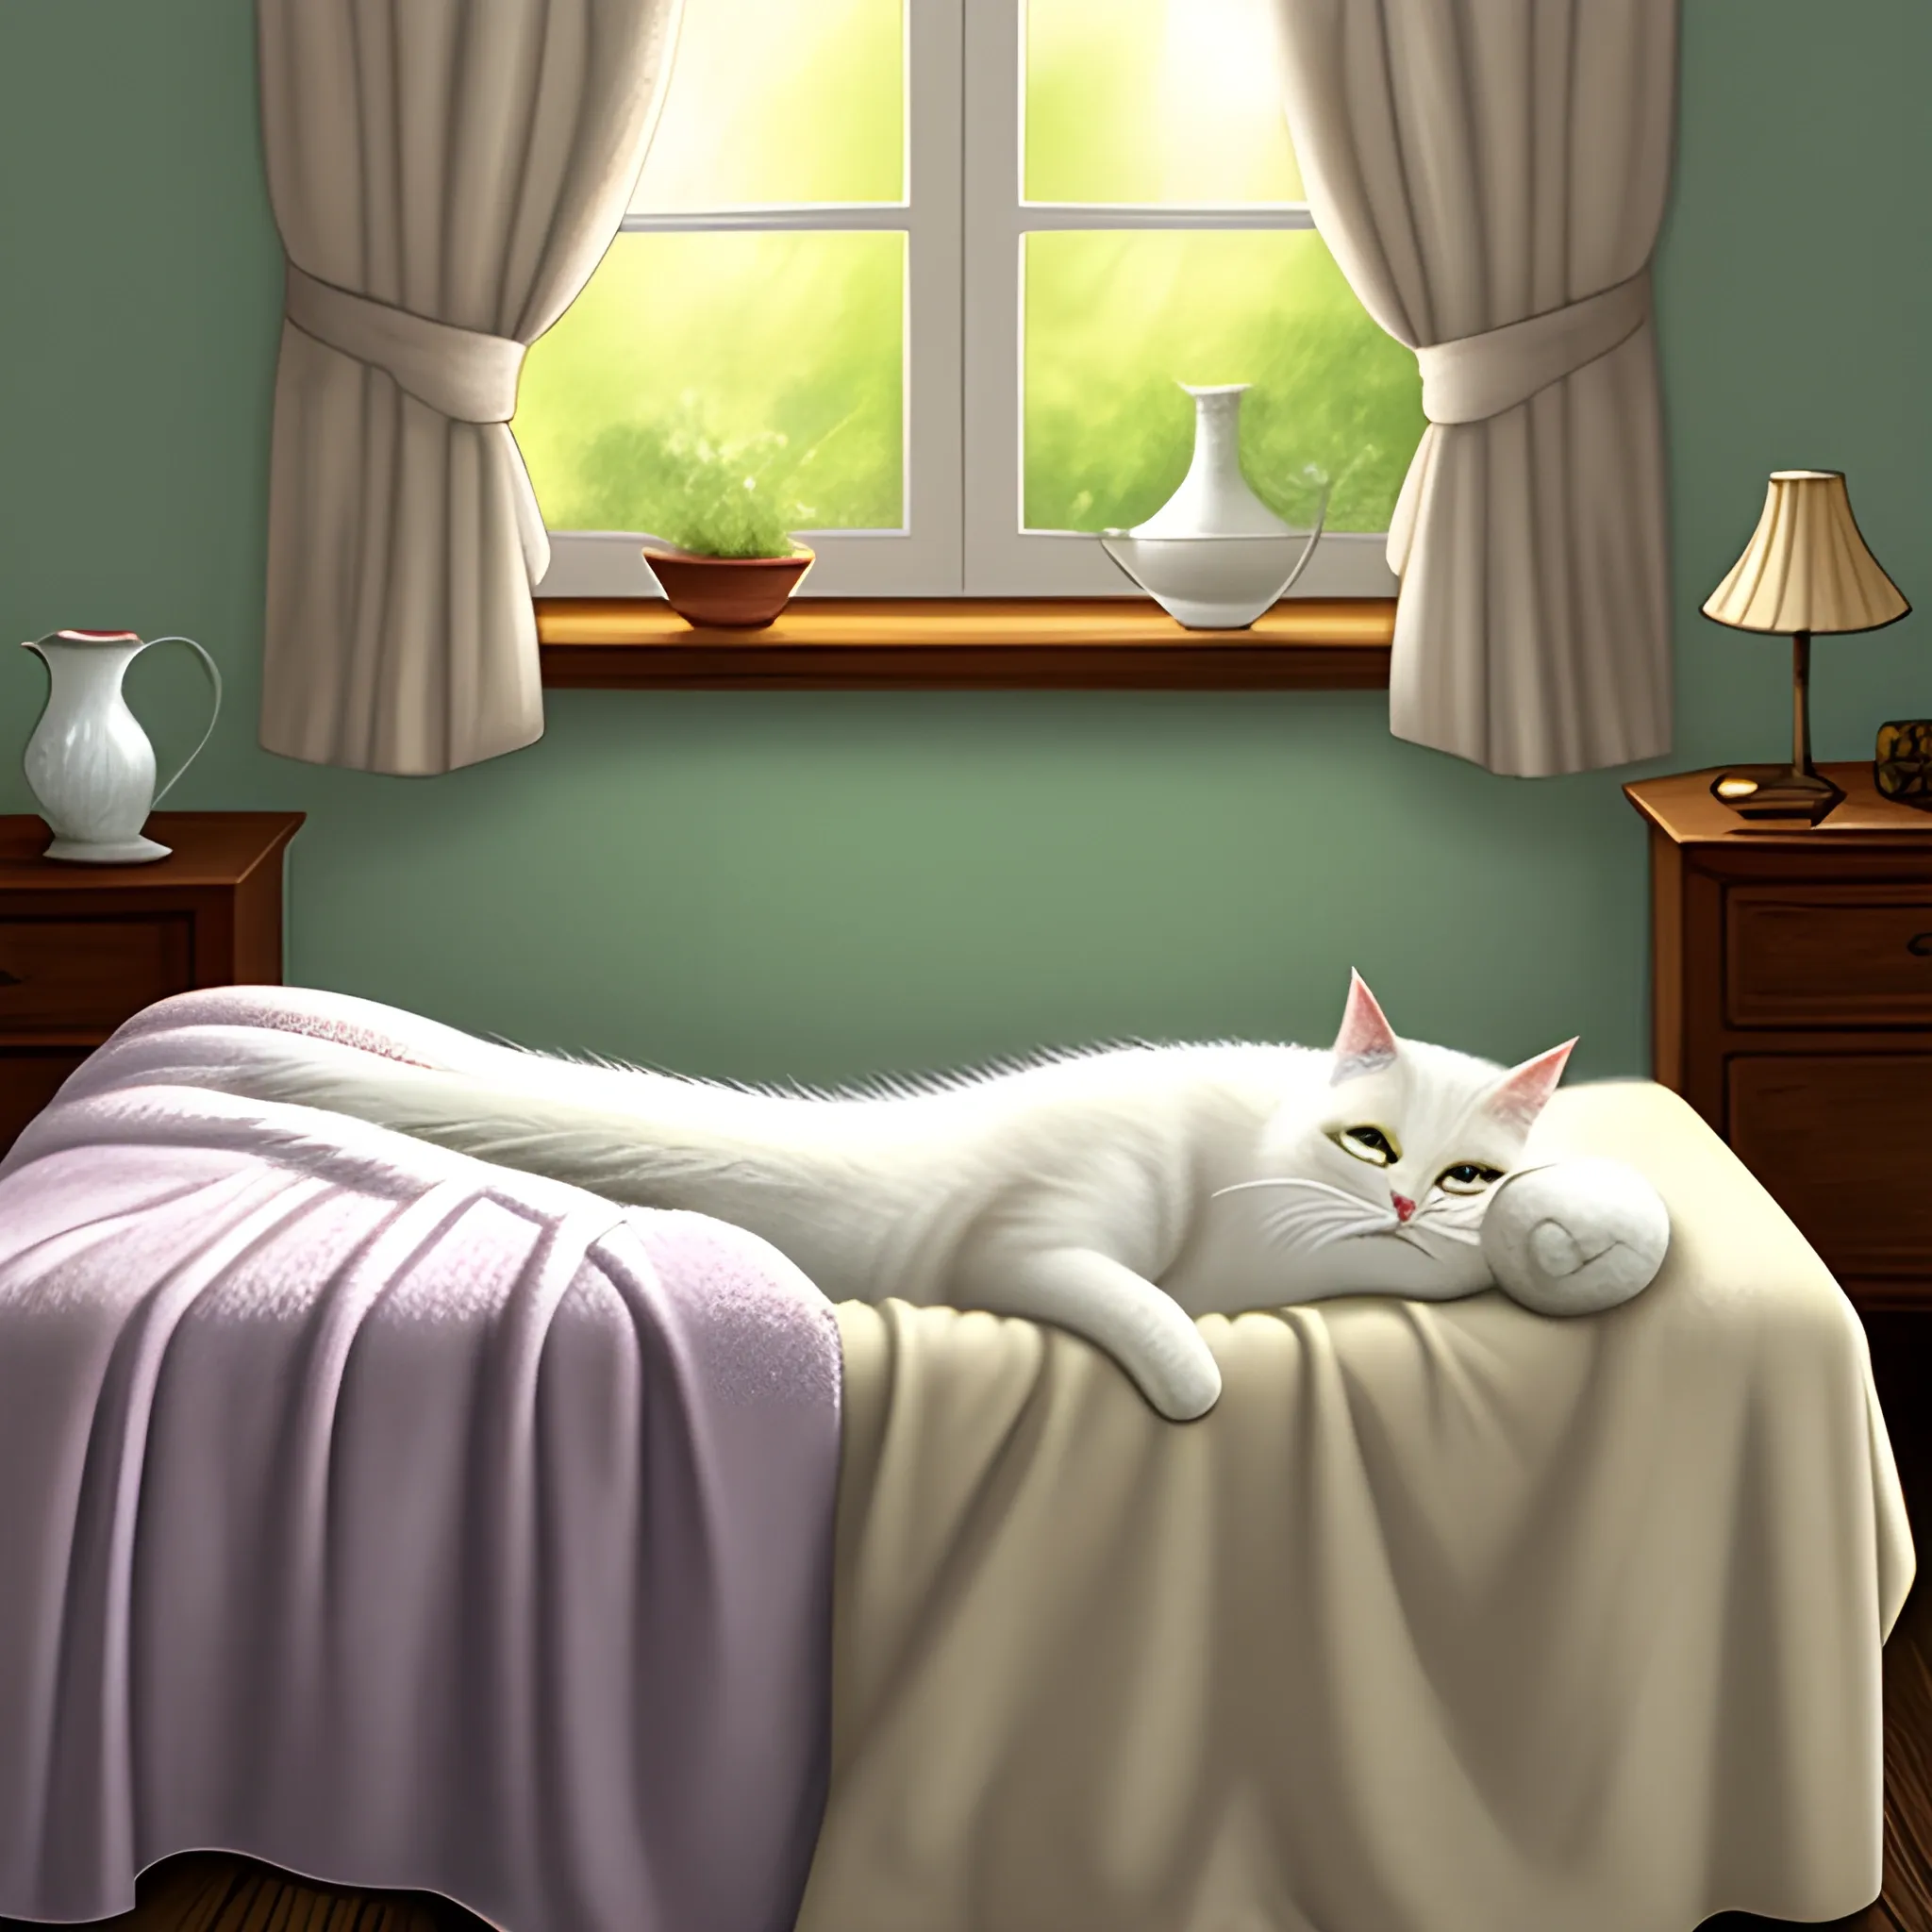 
Title: "Cat Nap on the Cozy Bed"

Prompt Description:

In this illustration, we want to capture the serene and heartwarming scene of a contented cat taking a peaceful nap on a comfy bed. The focus should be on showcasing the comfort and relaxation that the cat experiences during its slumber.

Setting:

The scene takes place indoors, inside a well-lit and cozy bedroom.
The bed should be large enough to accommodate the cat comfortably, with soft pillows and a warm, inviting blanket.
Cat Character:

The cat should be the center of attention, positioned at the center or one side of the bed.
It can be depicted in a curled-up position, with eyes closed, showing a sense of contentment and relaxation.
The cat's fur should be depicted with intricate details to convey its softness and texture.
Bedroom Environment:

To create a cozy atmosphere, use warm colors for the walls and decorations, such as shades of cream, beige, or light pastels.
Add elements like curtains, bedside tables with a lamp, and perhaps a potted plant to add visual interest to the scene.
The lighting should be soft and gentle, emanating from the bedside lamp or a nearby window, casting a warm glow on the cat and the surroundings.
Emotional Tone:

The overall mood should evoke a sense of tranquility, comfort, and contentment.
Viewers should feel a sense of peace and warmth as they observe the serene moment of the cat's nap.
Additional Elements (Optional):

If desired, you may include small details to enhance the narrative, such as a favorite toy or a book placed on the bedside table, indicating the presence of a loving and caring owner.
Overall, the illustration should portray the perfect moment of a cat indulging in a blissful nap on a cozy bed, inviting viewers to share in the joy of relaxation and simple pleasures., Pencil Sketch